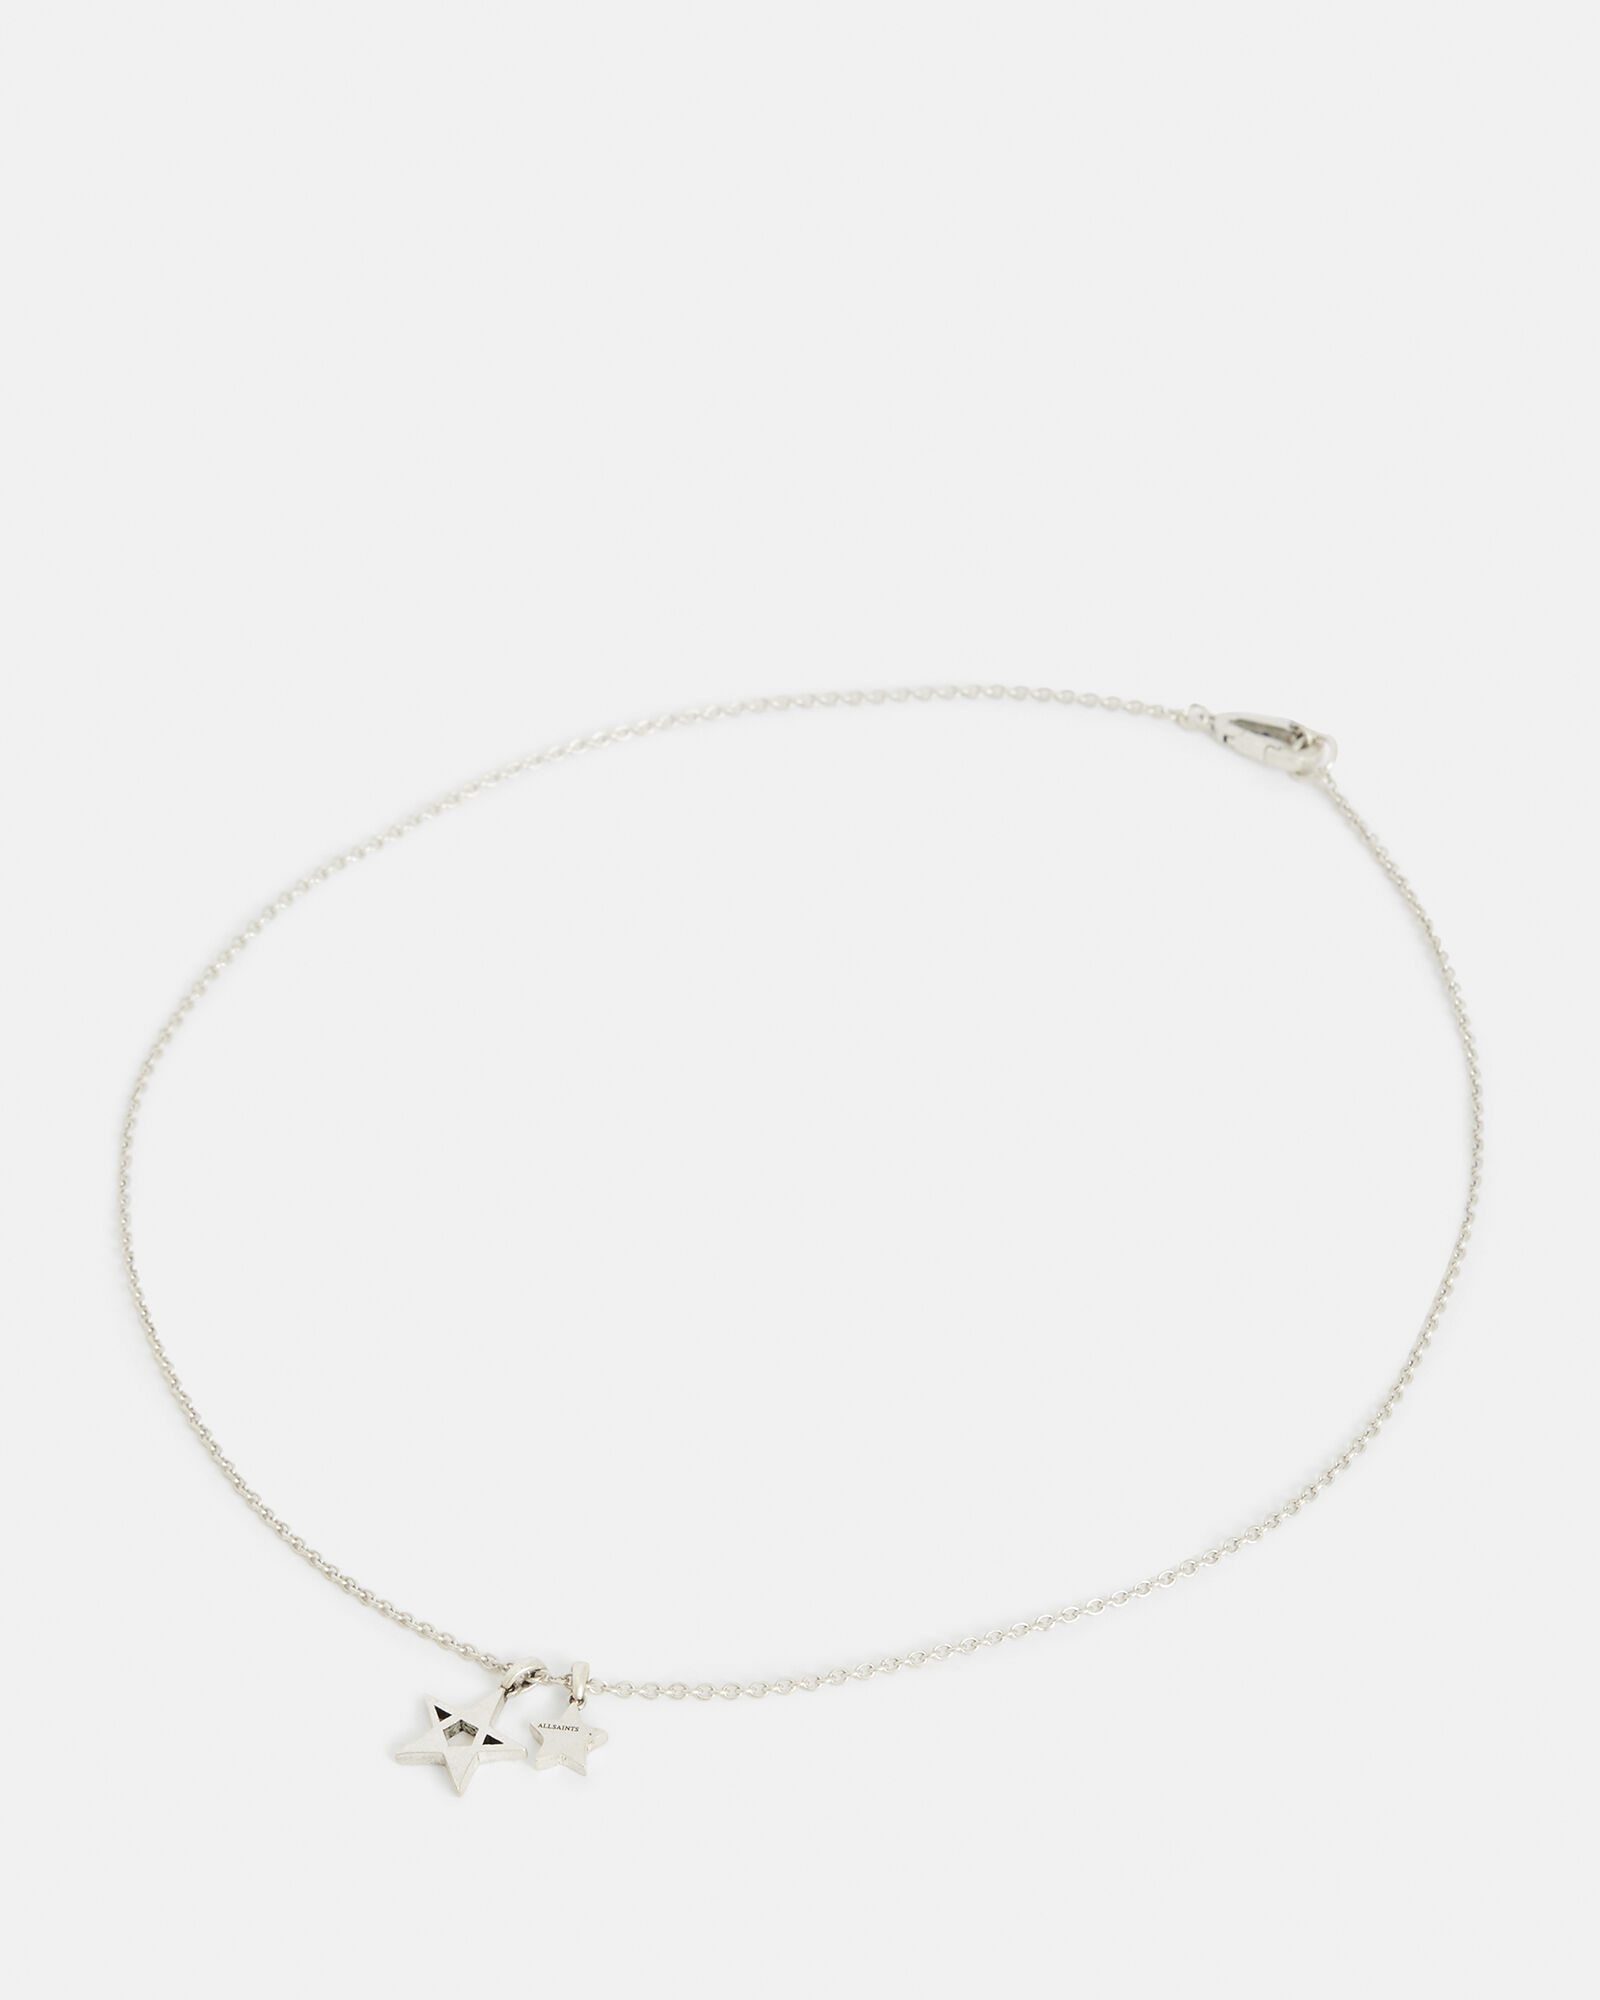 Parts of Four Charm Chain choker necklace - Silver